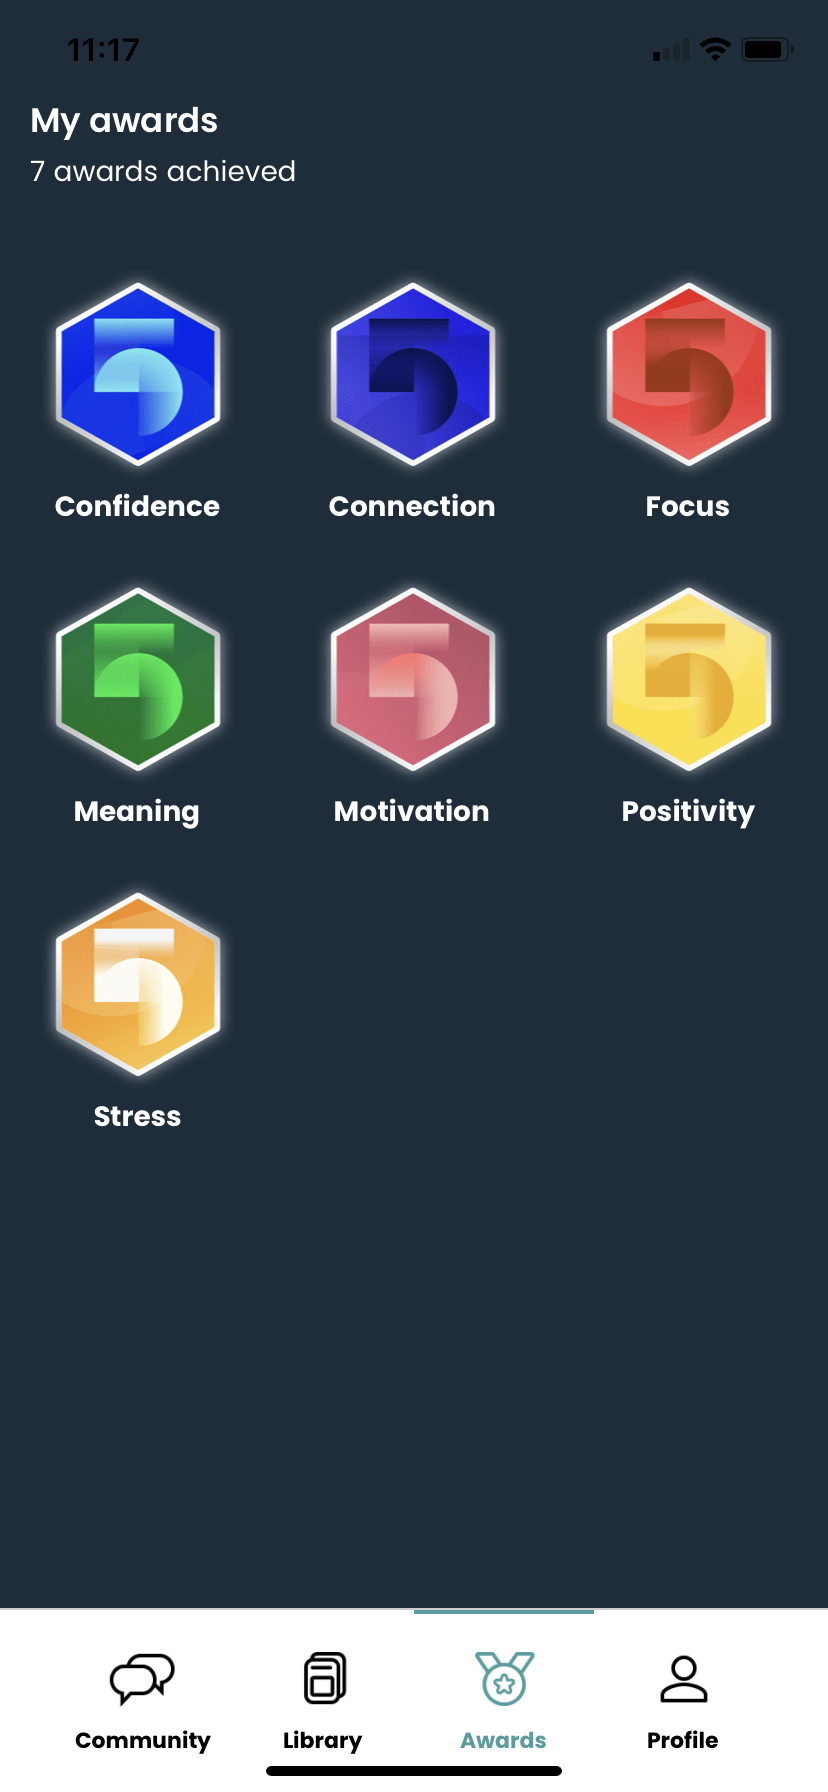 A screenshot of the Fika app. It shows the user's awards - confidence, connection, focus, meaning, motivation, positivity and stress.